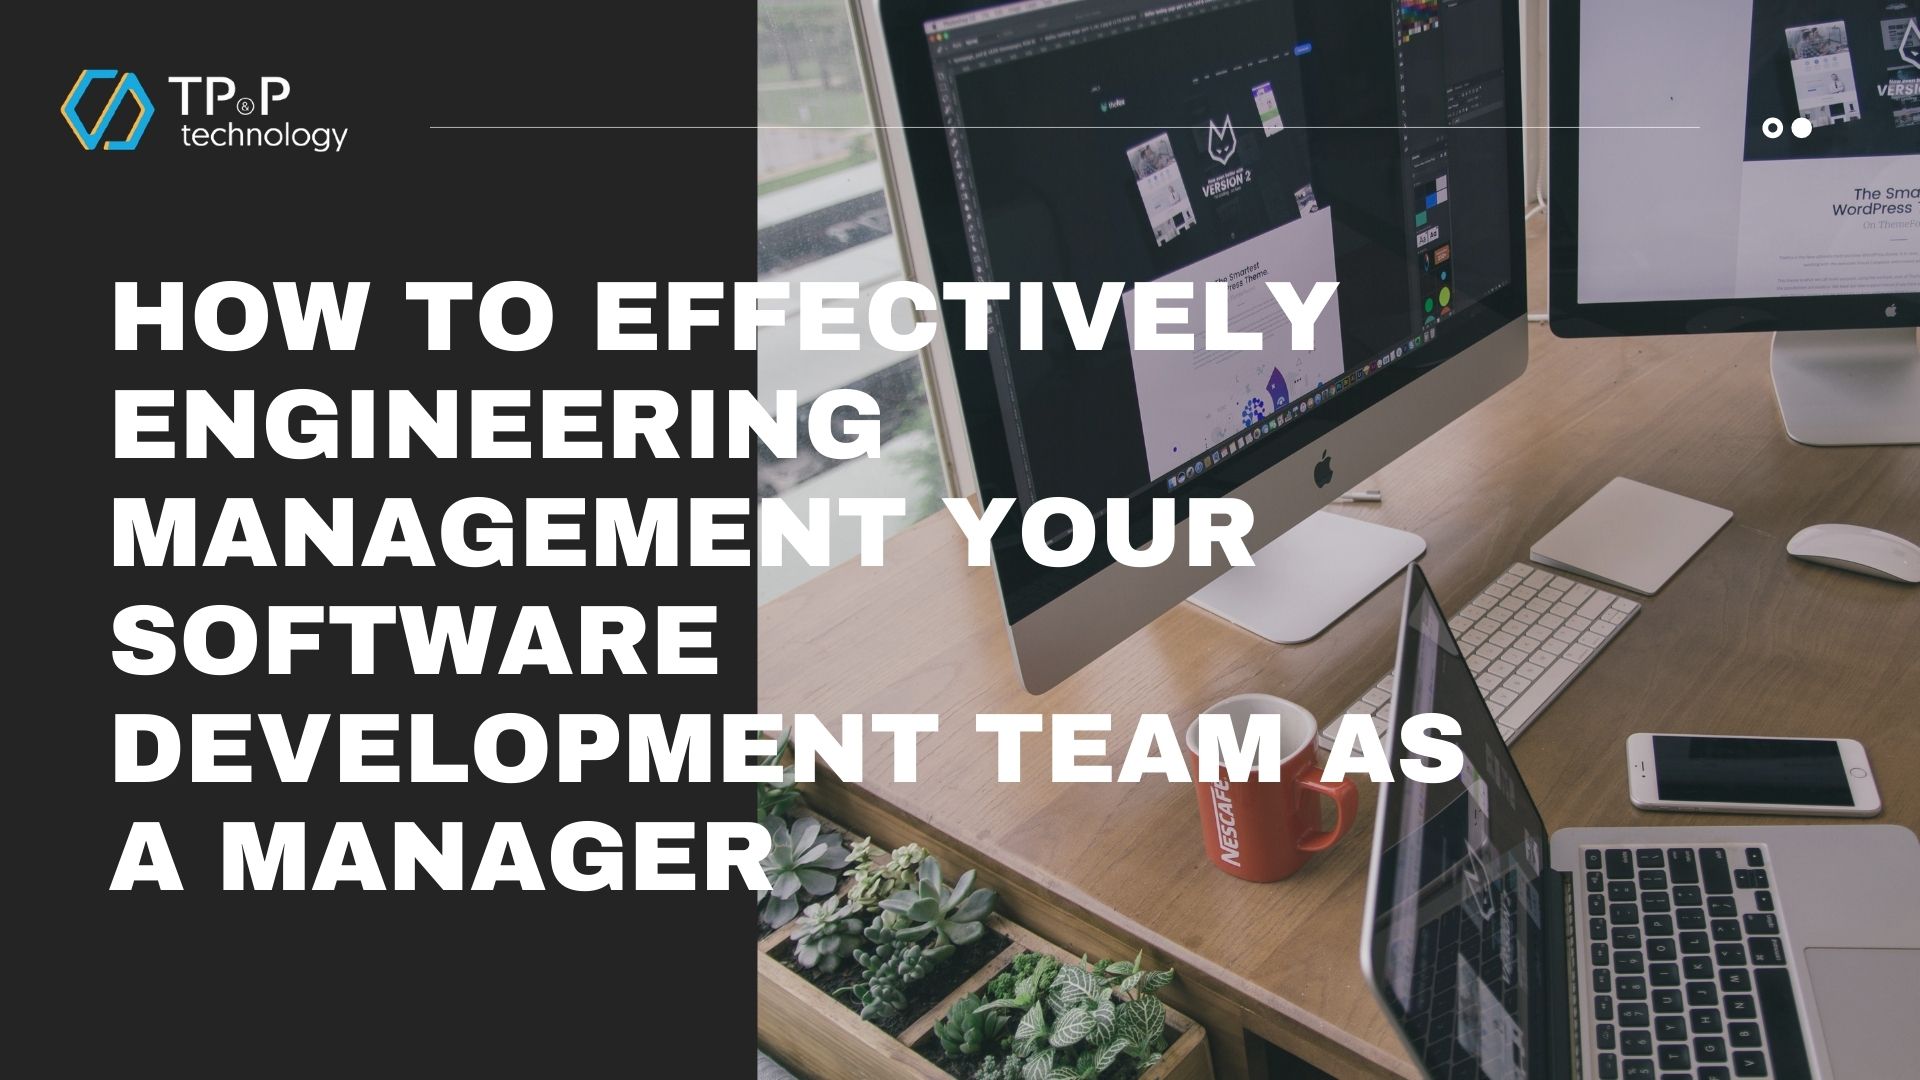 How To Effectively Engineering Management Your Software Development Team